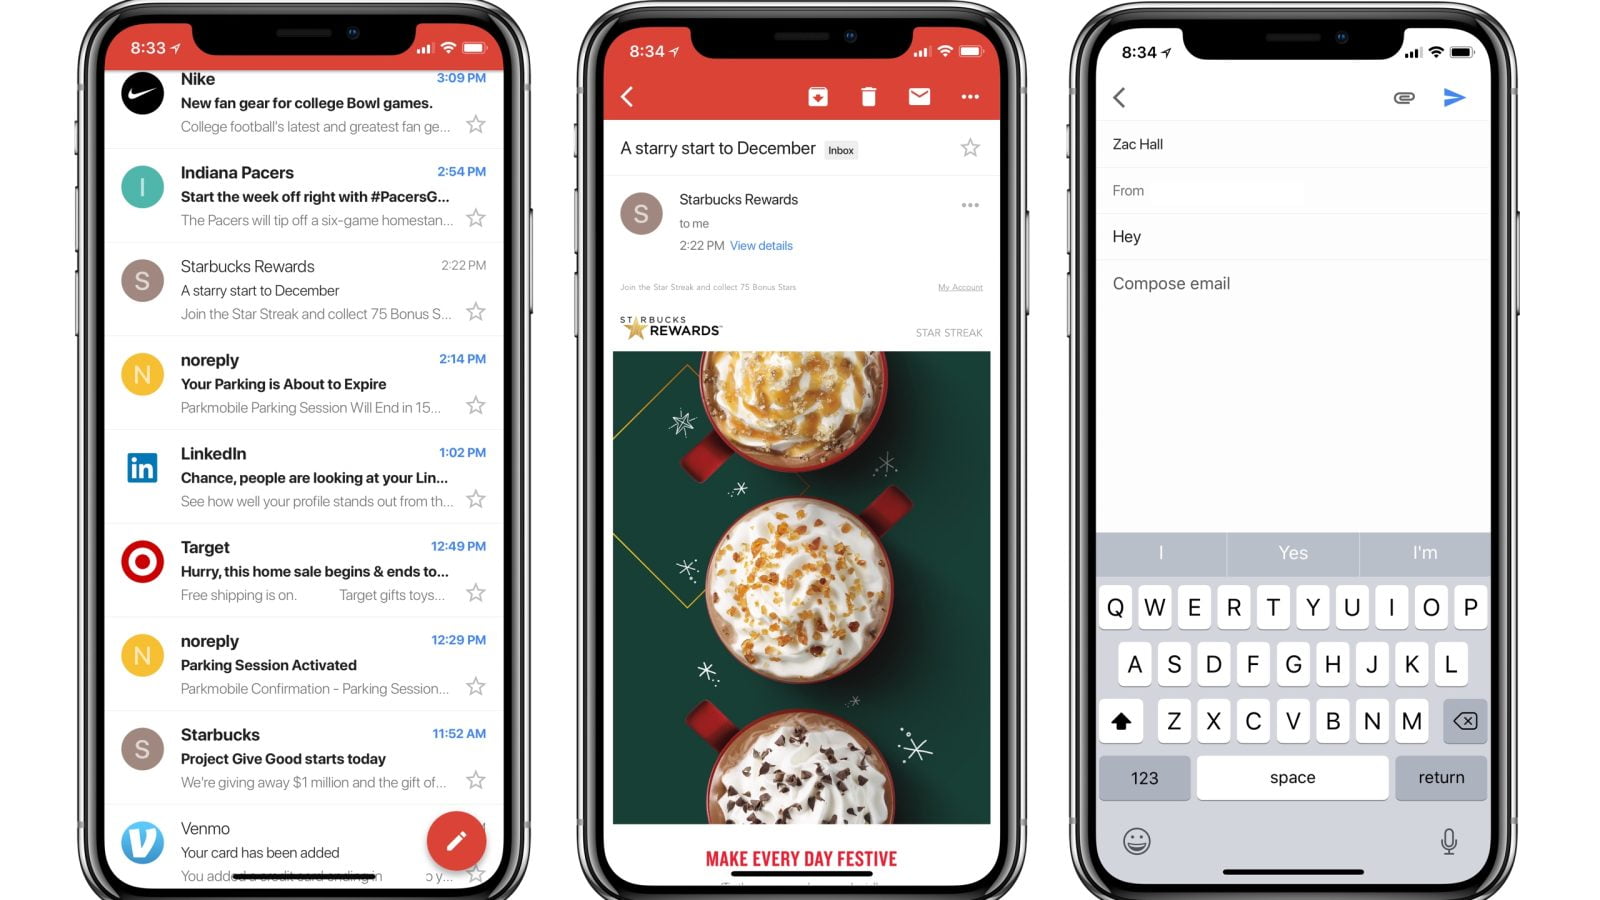 Google is starting to update its iOS apps including Gmail after three months of silence